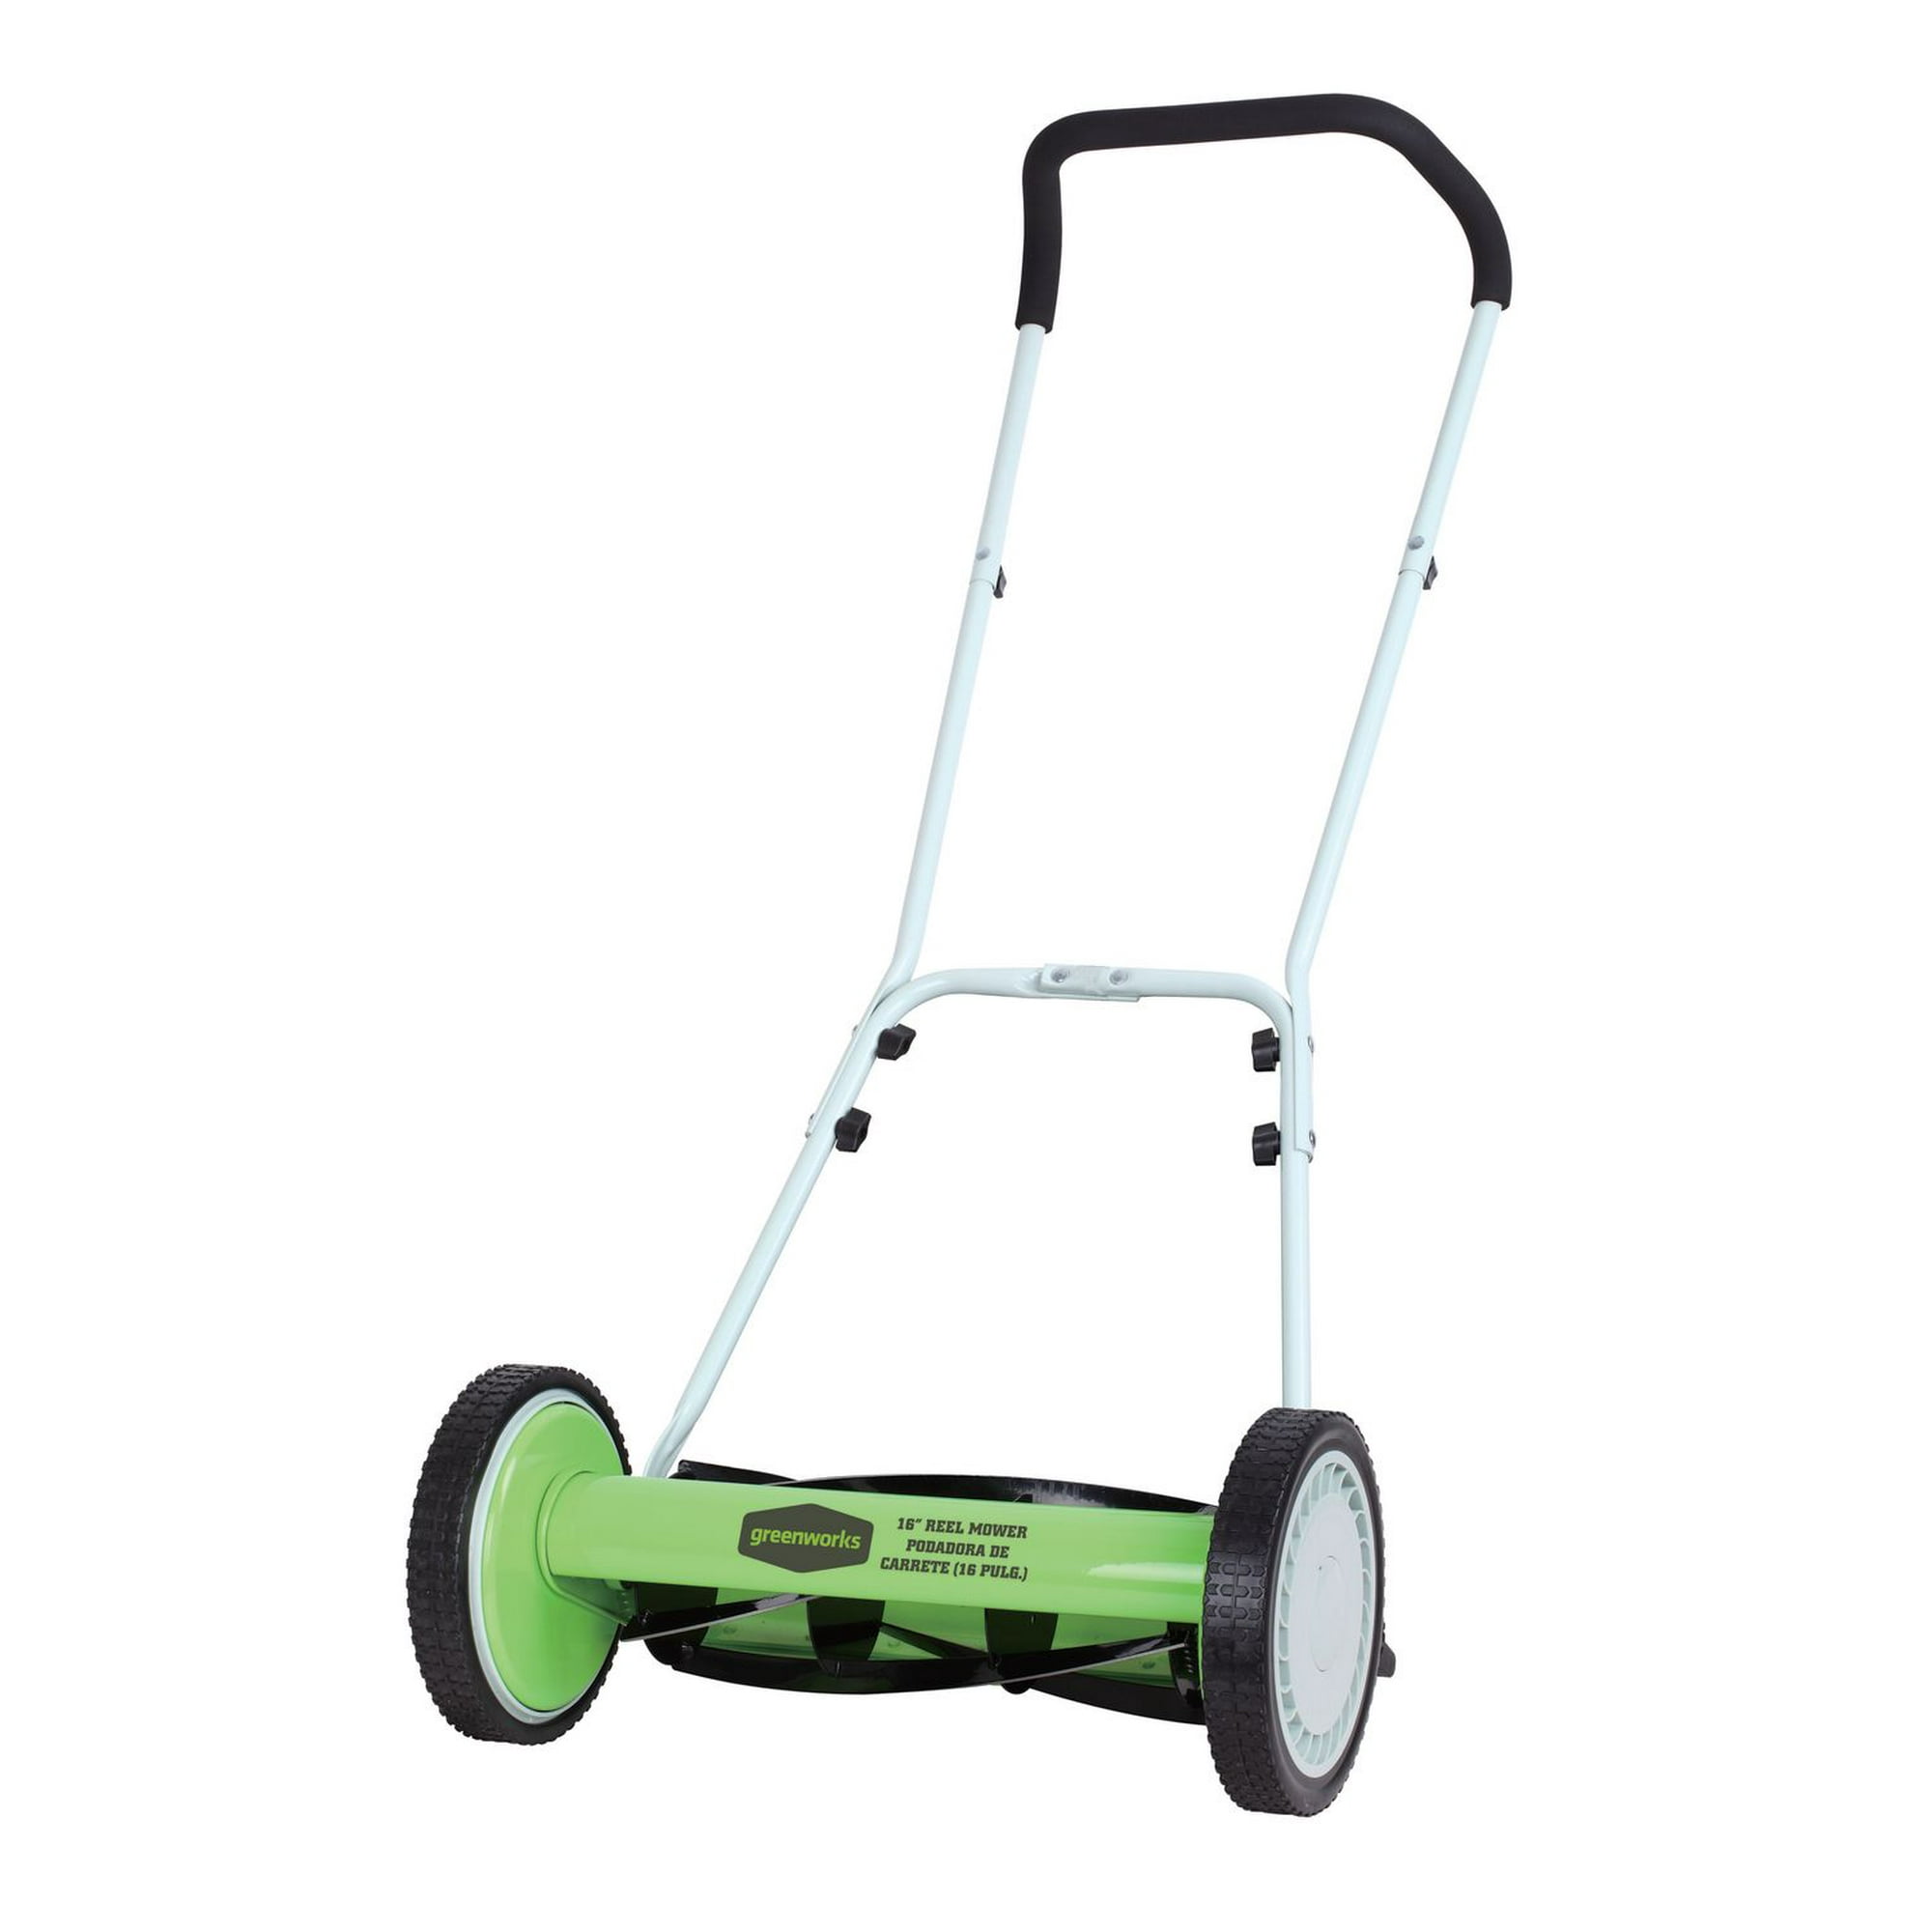 Fichiouy 16 Reel Lawn Mower with Grass Catcher Cordless Hand Push